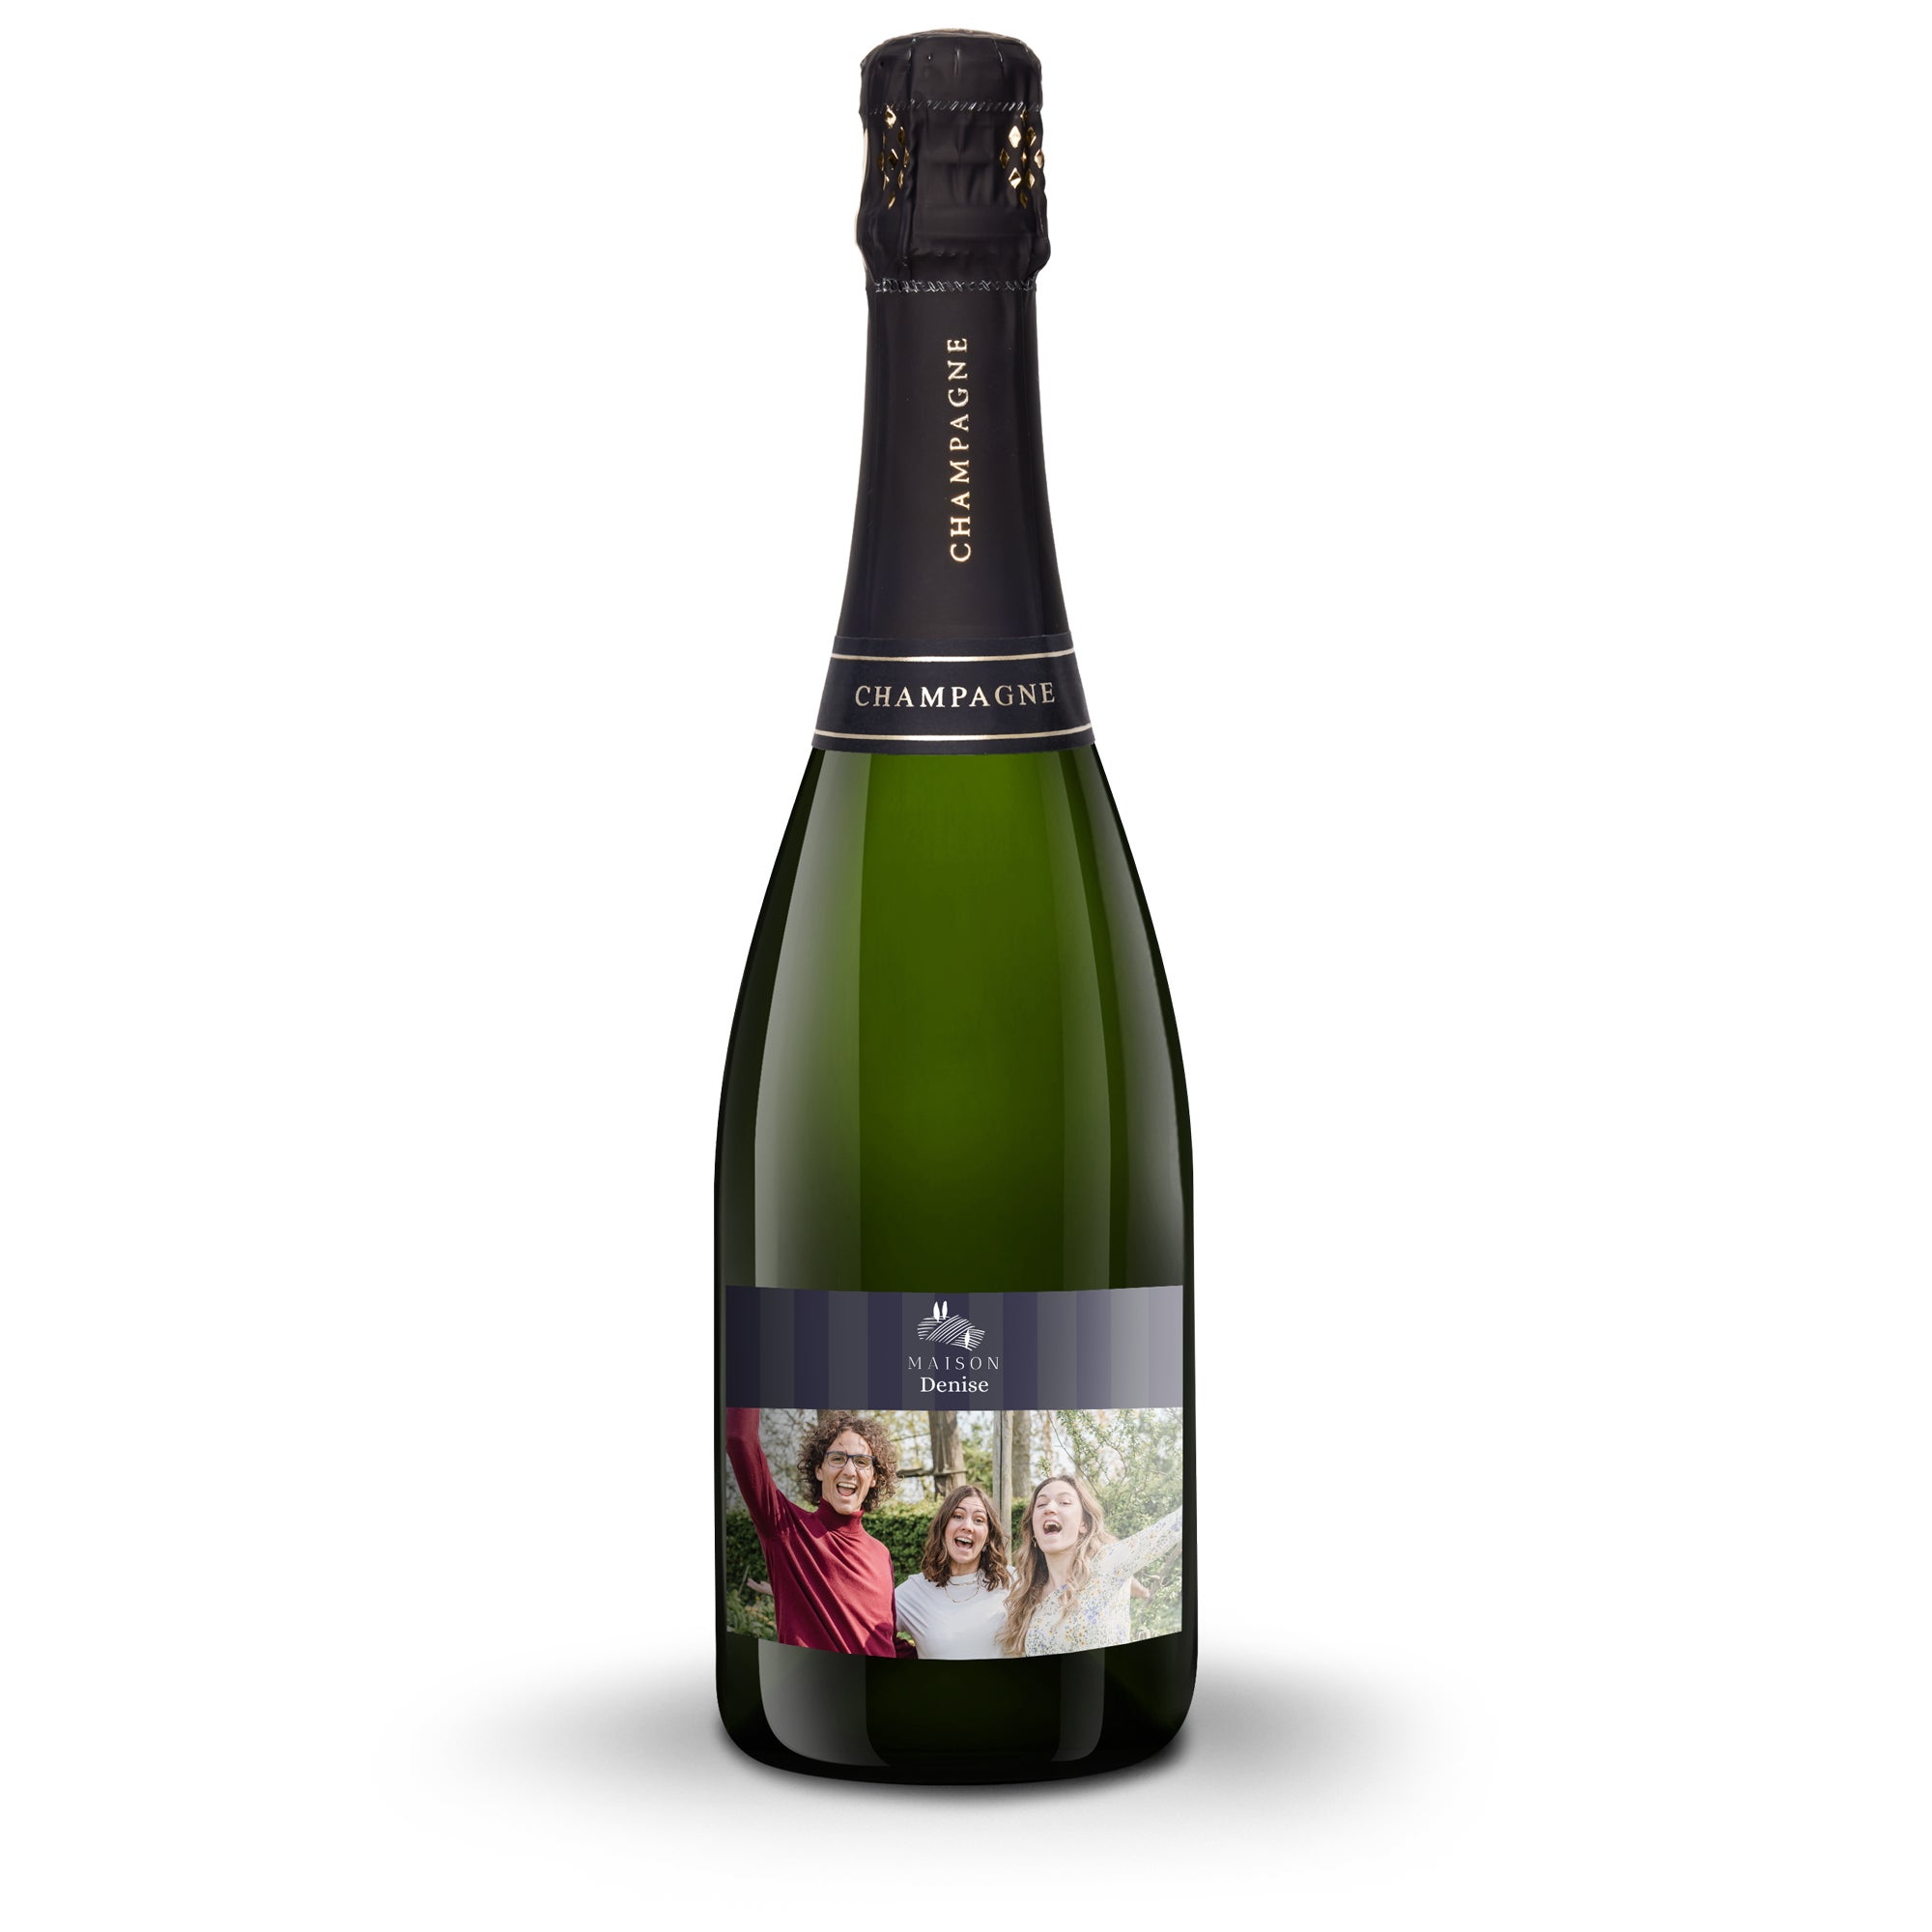 Champagne with personalised label - Rene Schloesser - 750 ml